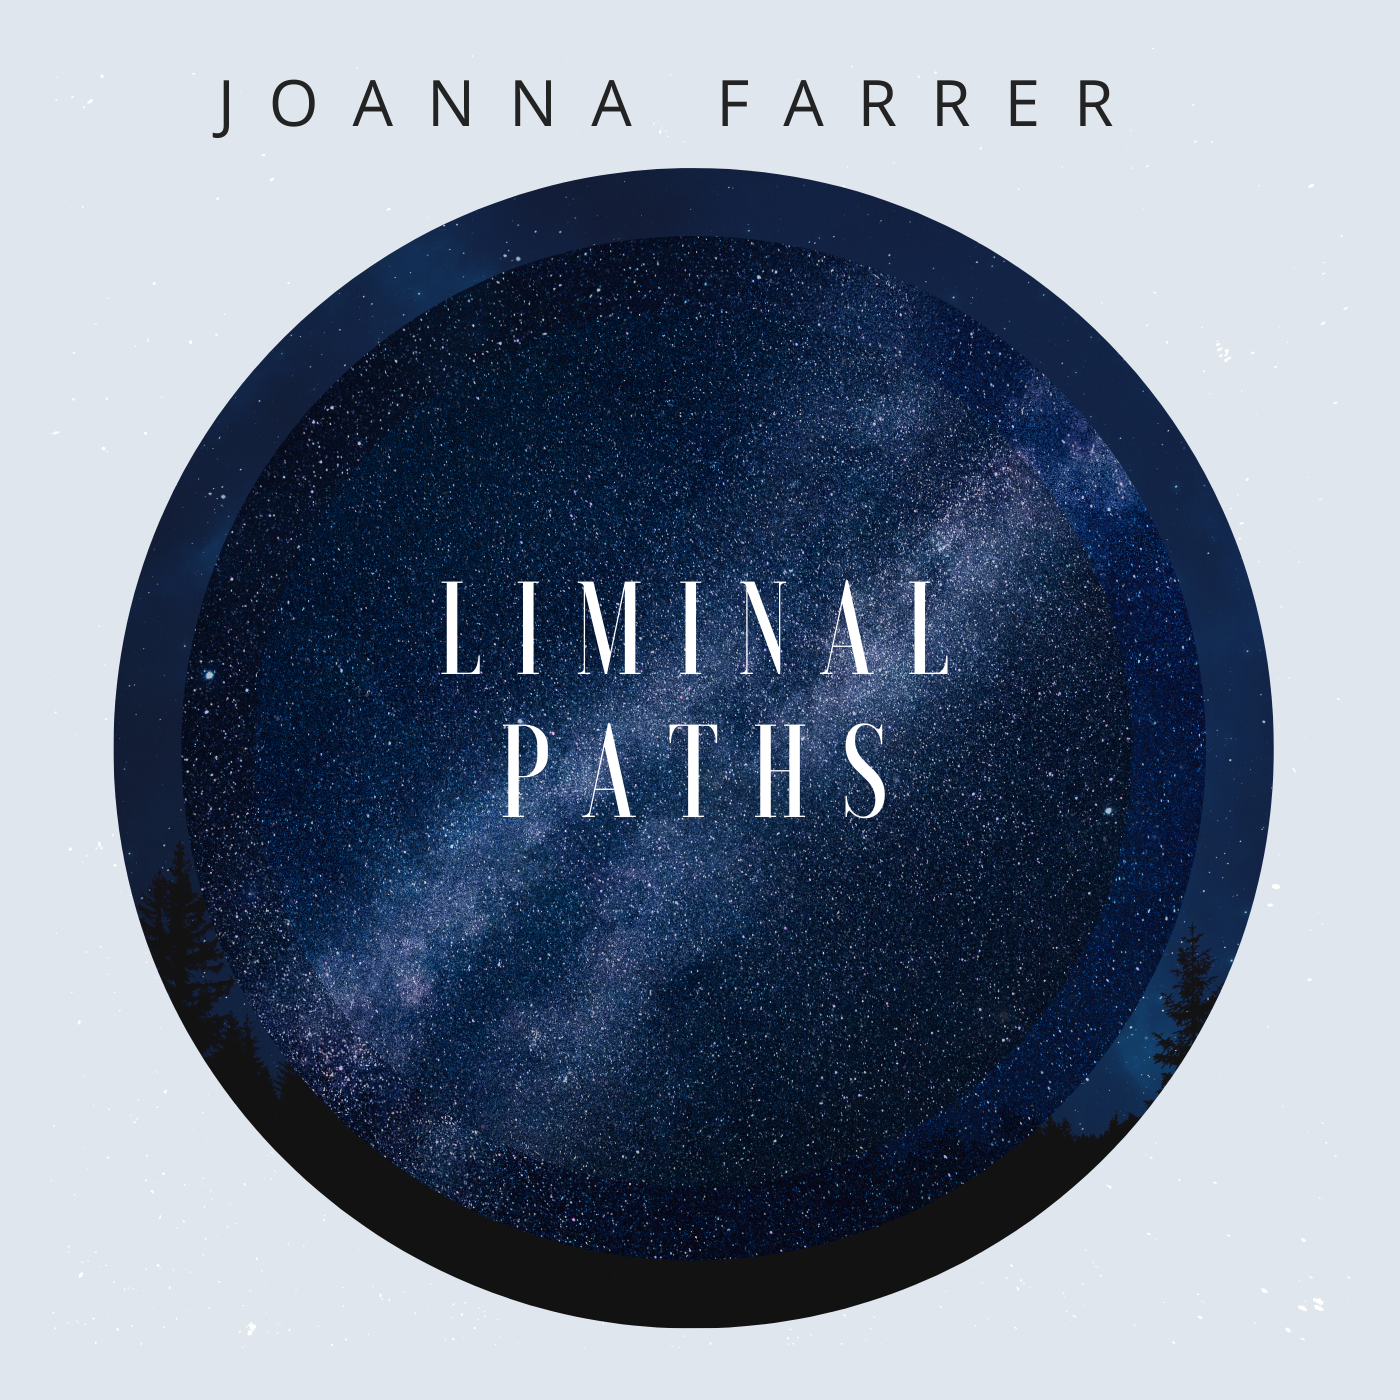 Pre-Order Liminal Paths - Signed CD